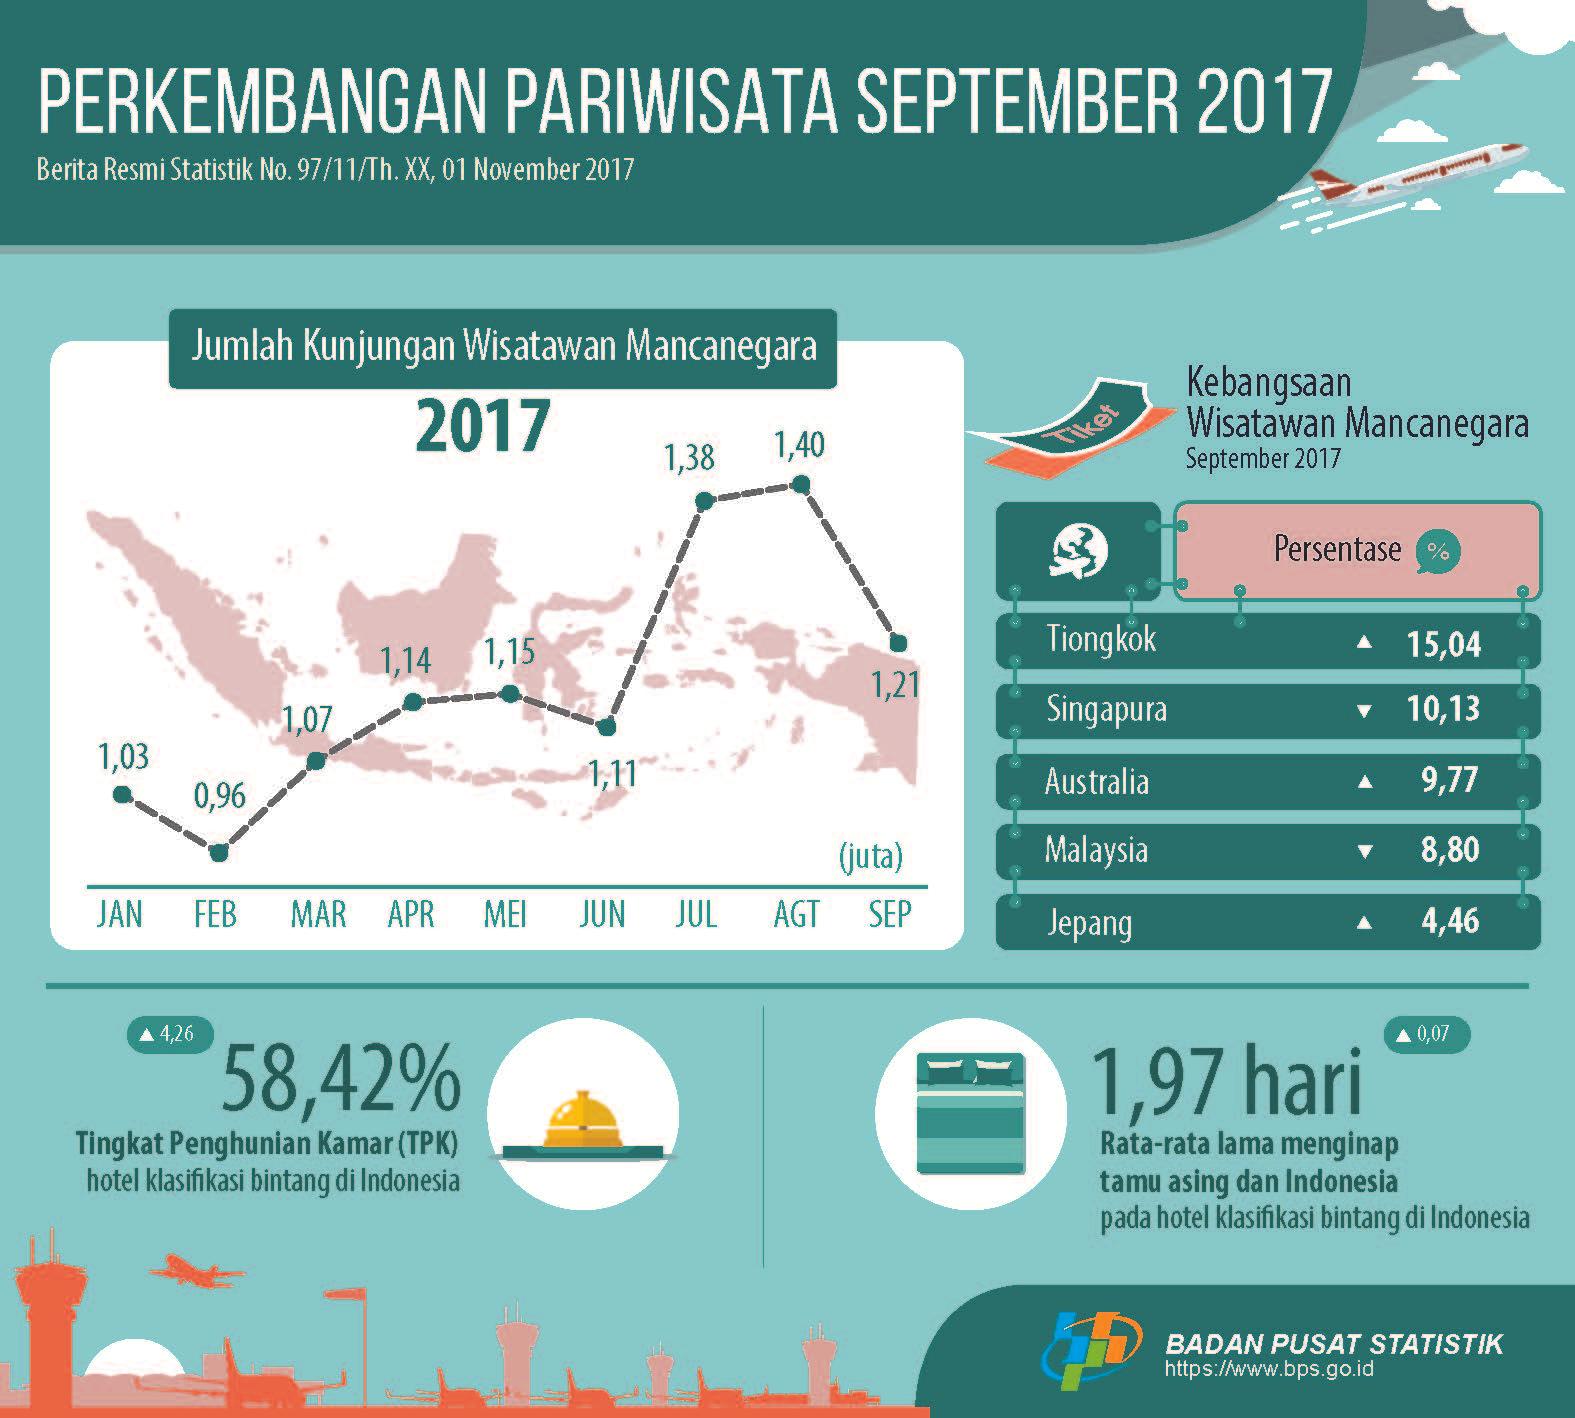 Foreign visitor in September 2017 reached 1.21 Million visits